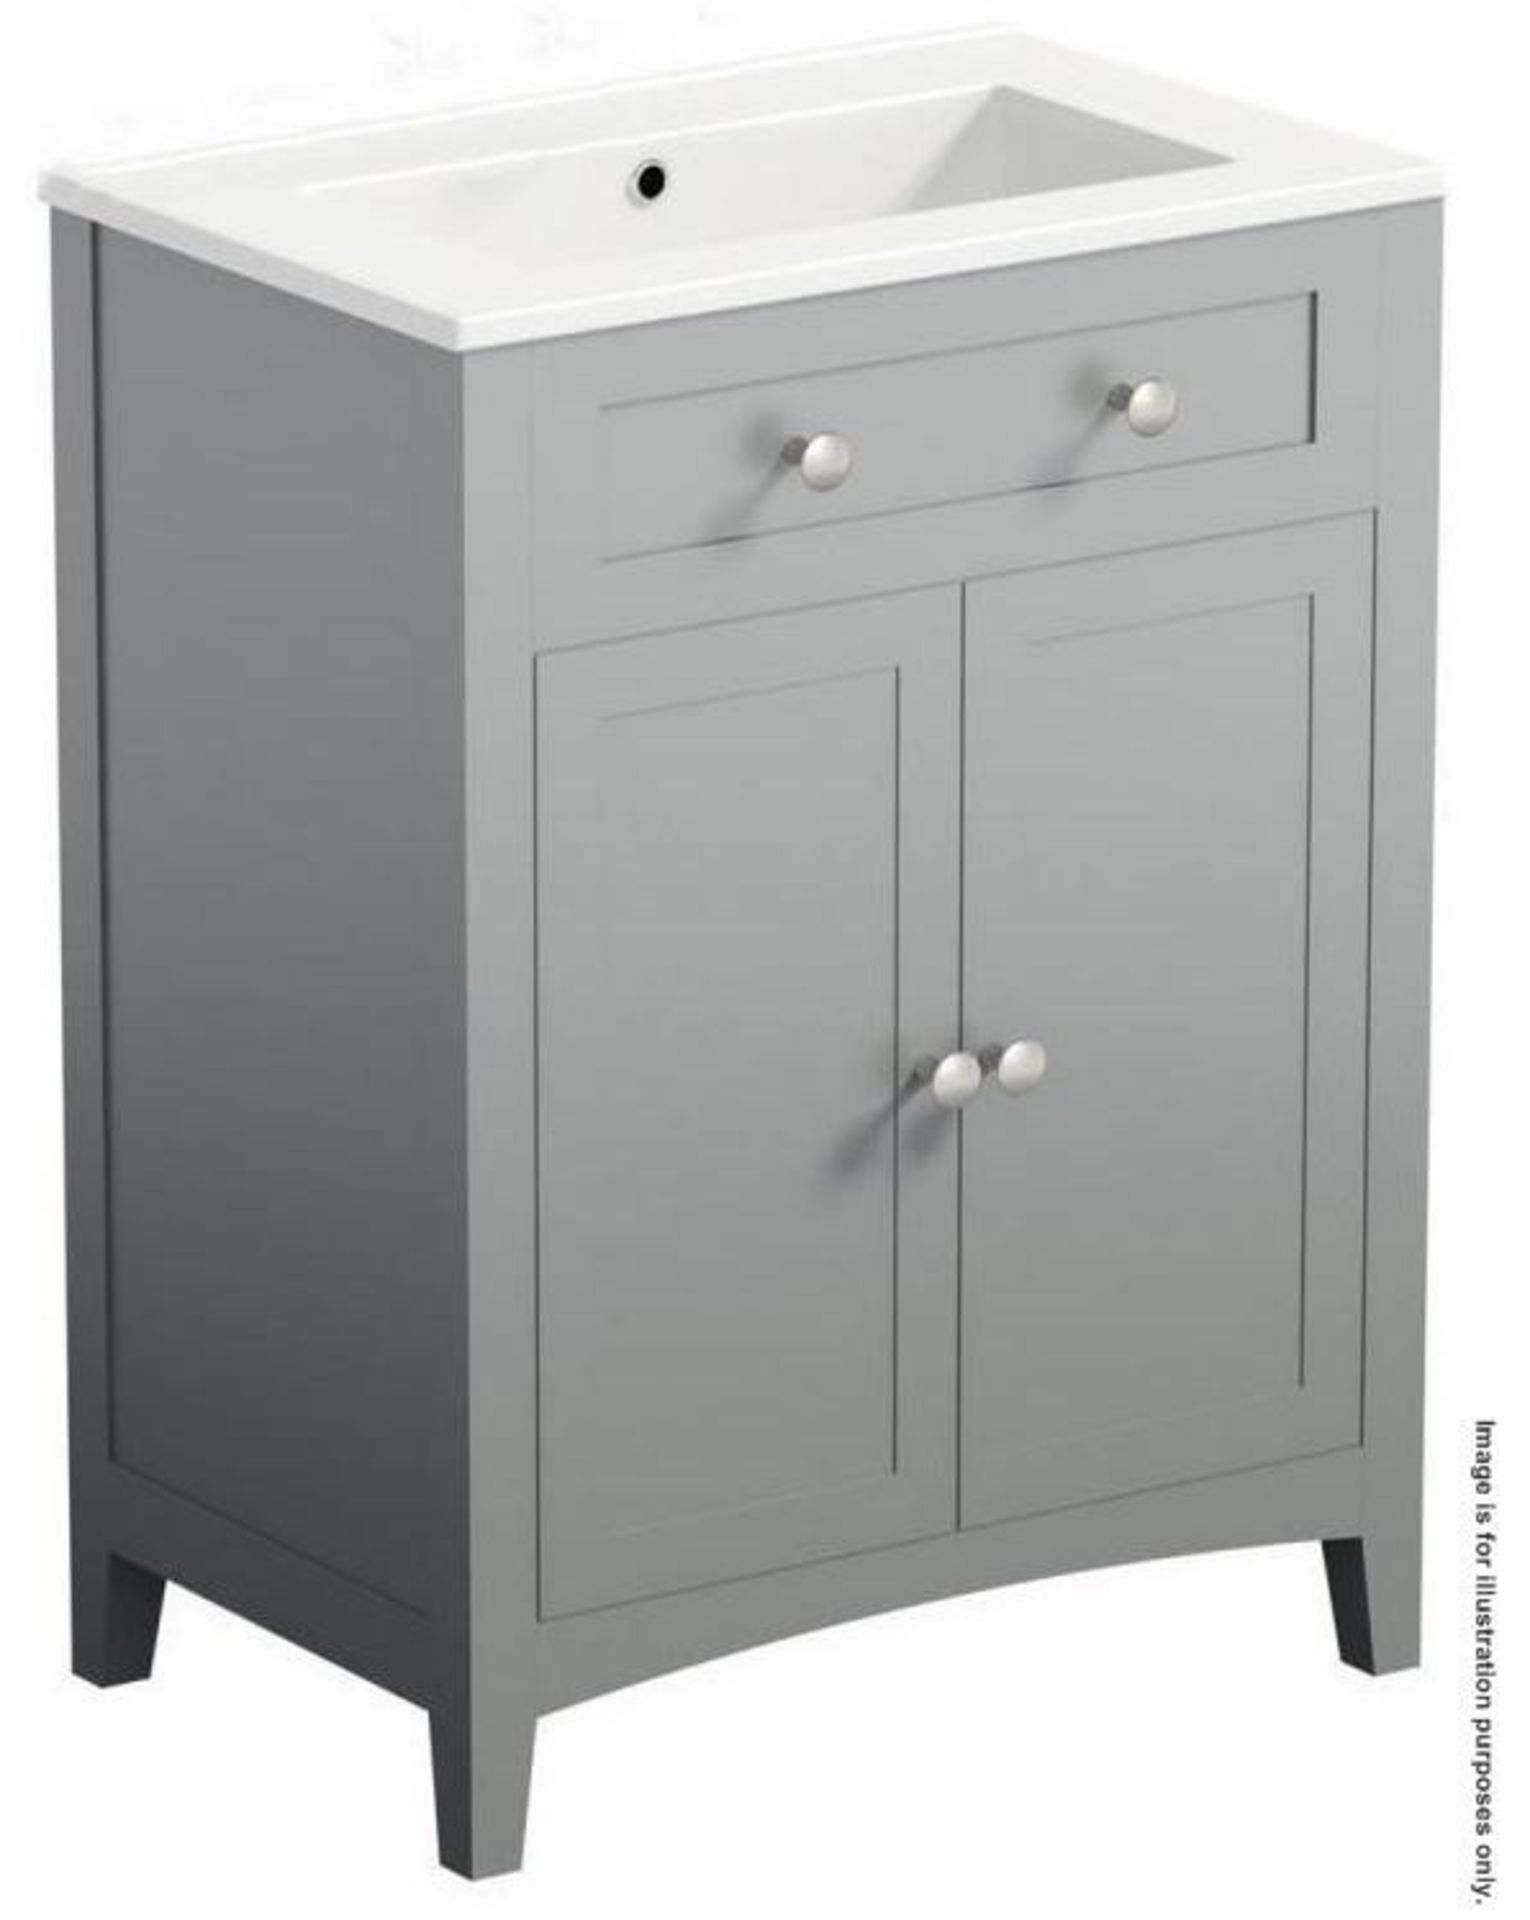 1 x Camberley Grey 600mm Vanity Unit - H800 x W600 x D390mm - Sink Basin Not Included - CL190 - Ref